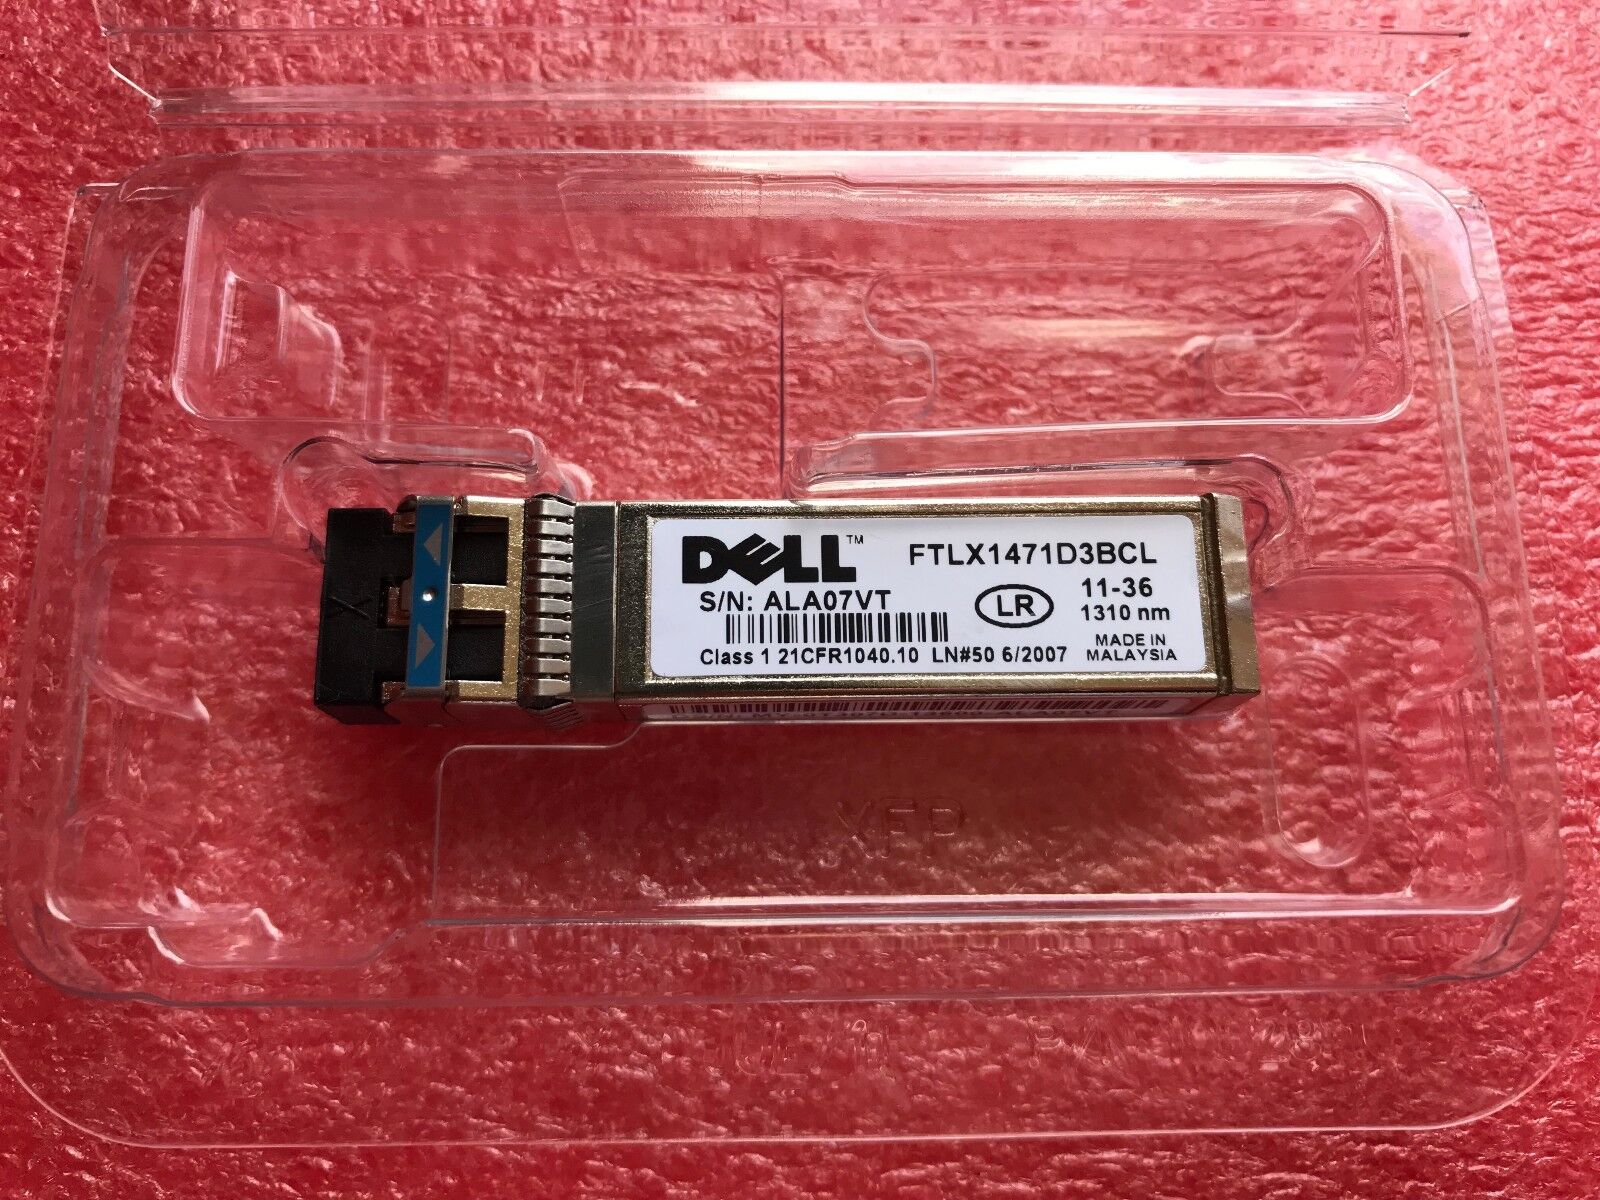 10GbE SFP+LR 10km for Dell Networking N4000 Series 10GbE Switches w/90days WRTY